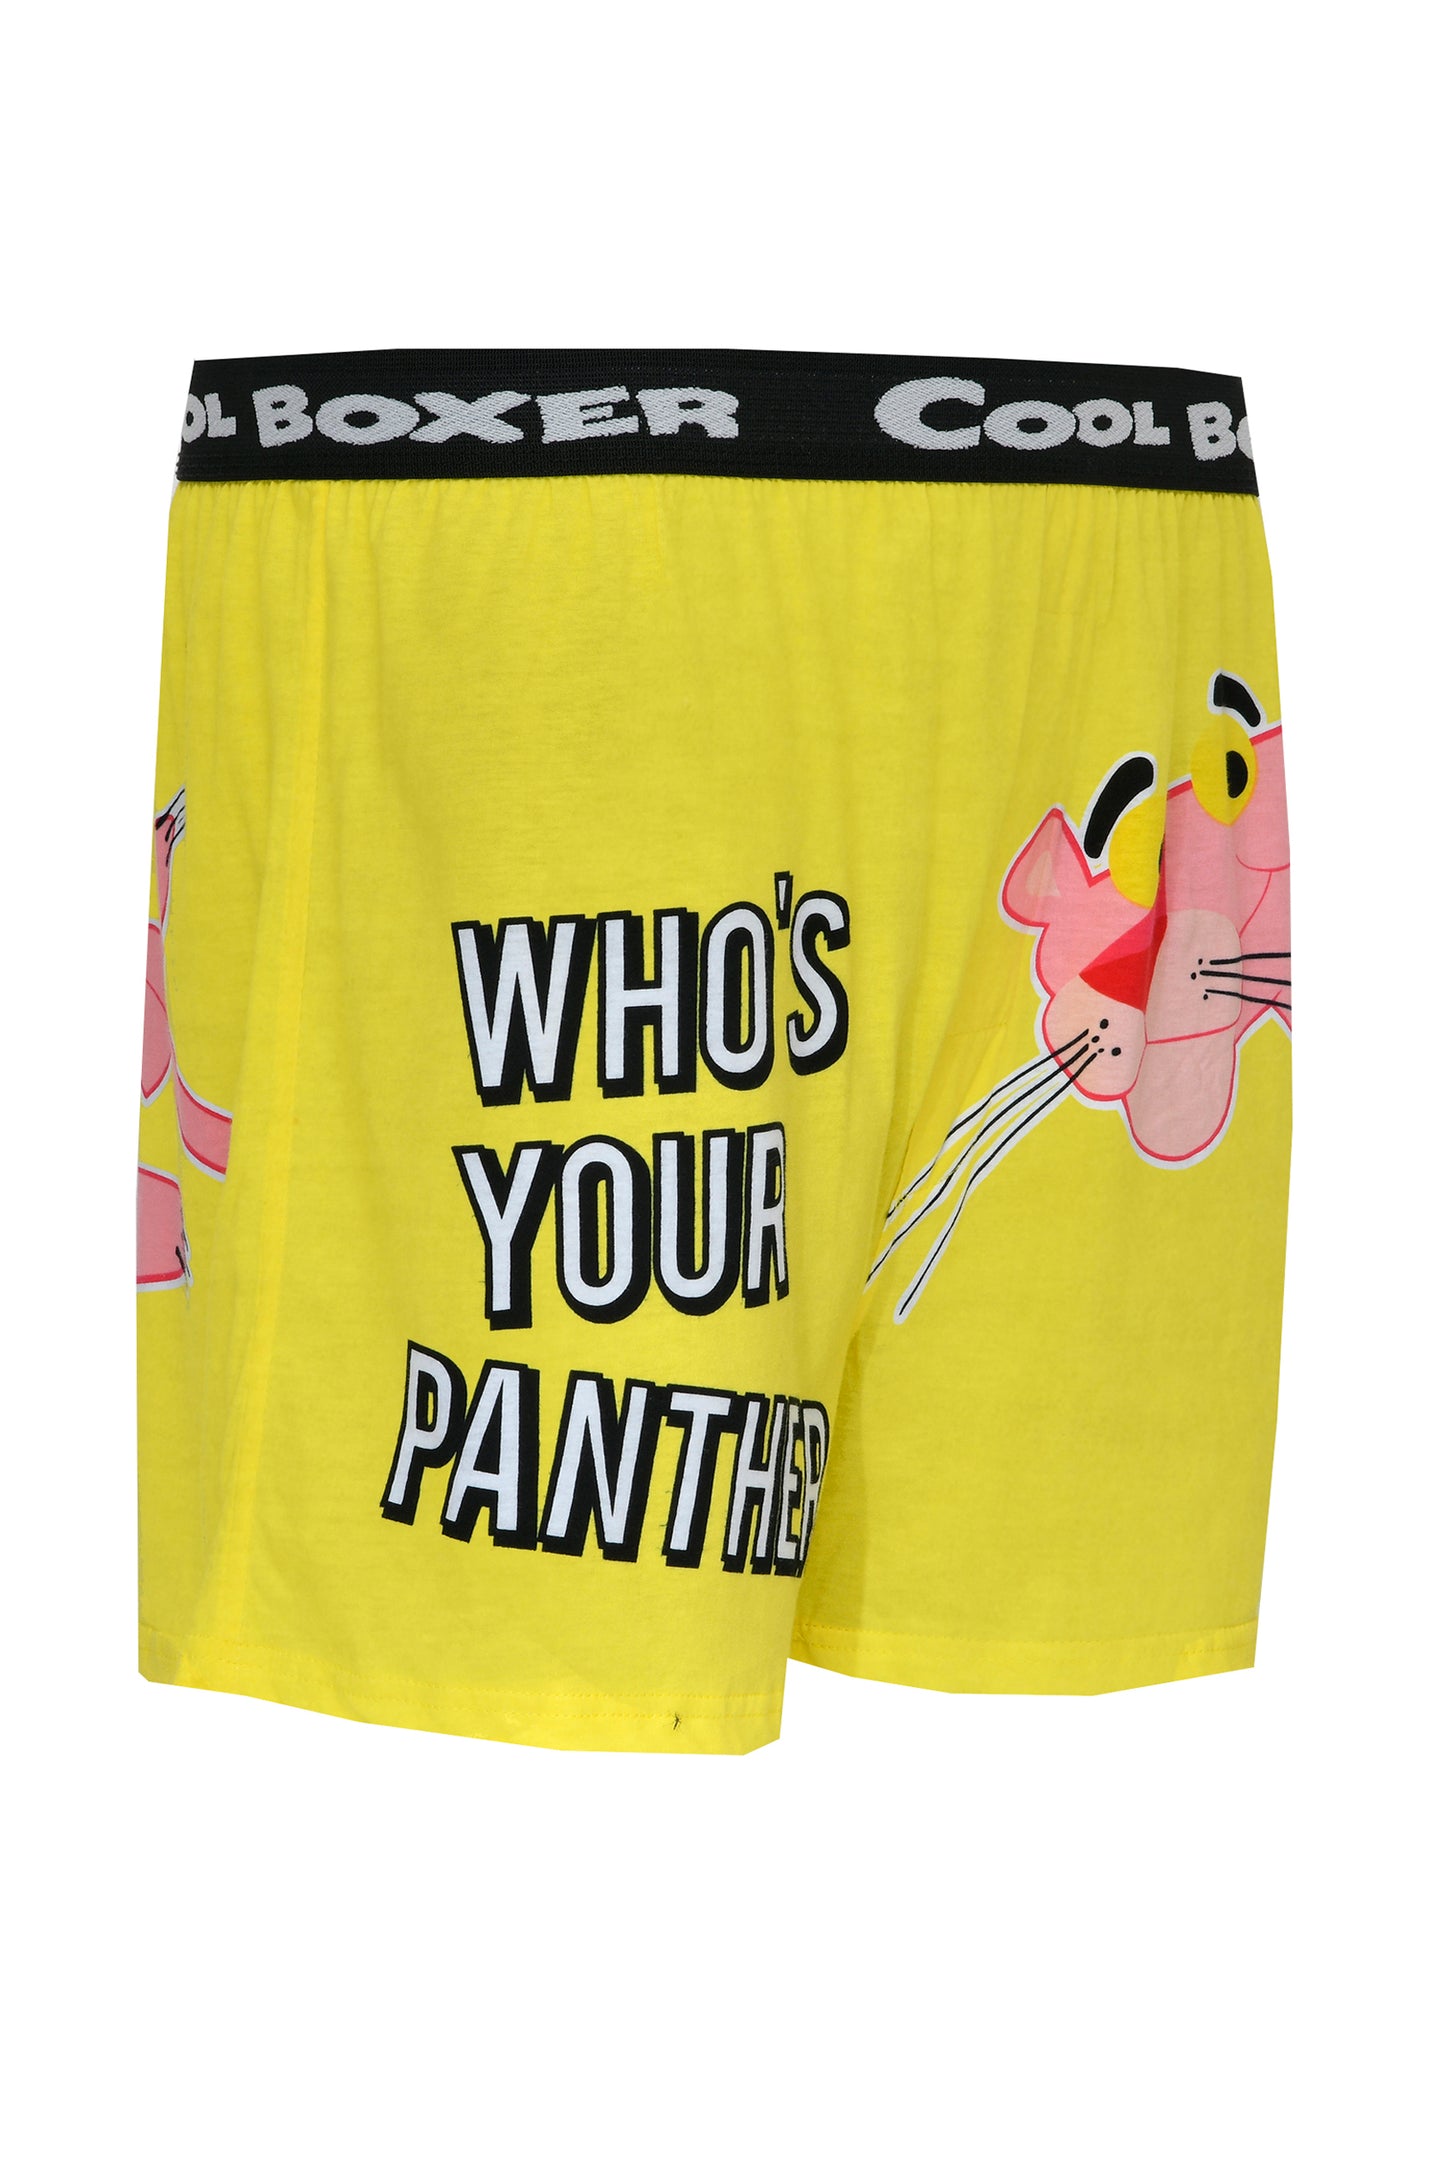 Men Yellow "WHO'S YOUR PANTHER" Cartoon boxer